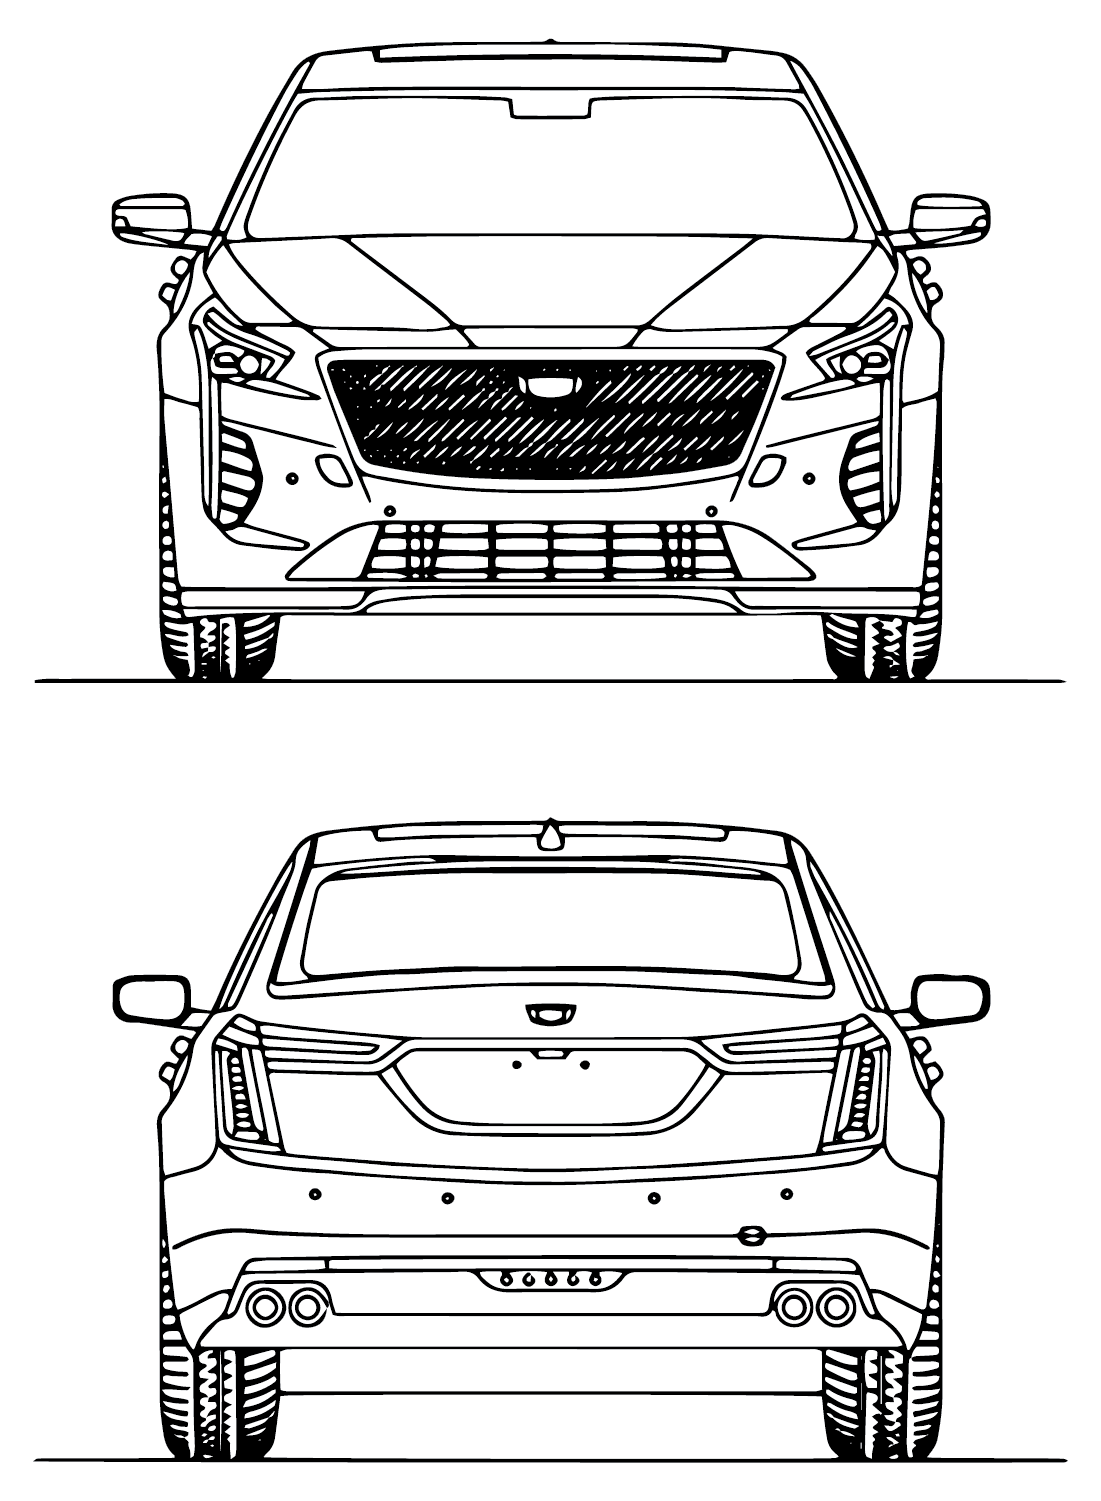 Cadillac CT6 V-Sport Coloring Page from Cadillac